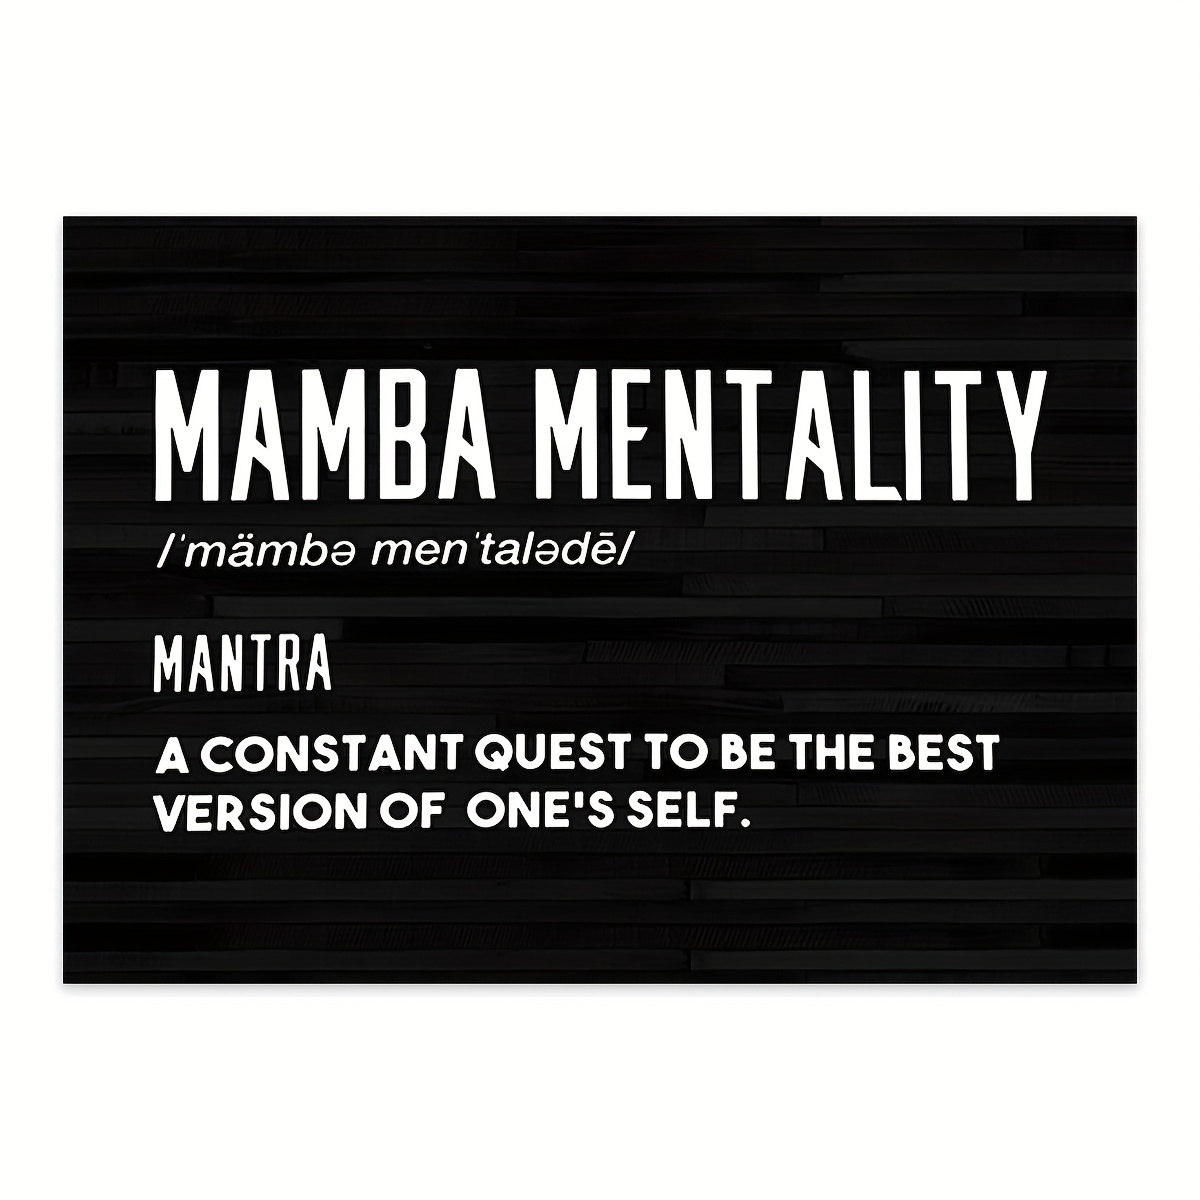 

1pc Mamba Mentality Motivational Quote Canvas Art, Motivational Basketball Wall Art, Inspirational Wall Art Canvas Painting, Modern Wall Art Print Room Decor, For Office Bedroom Home Decor